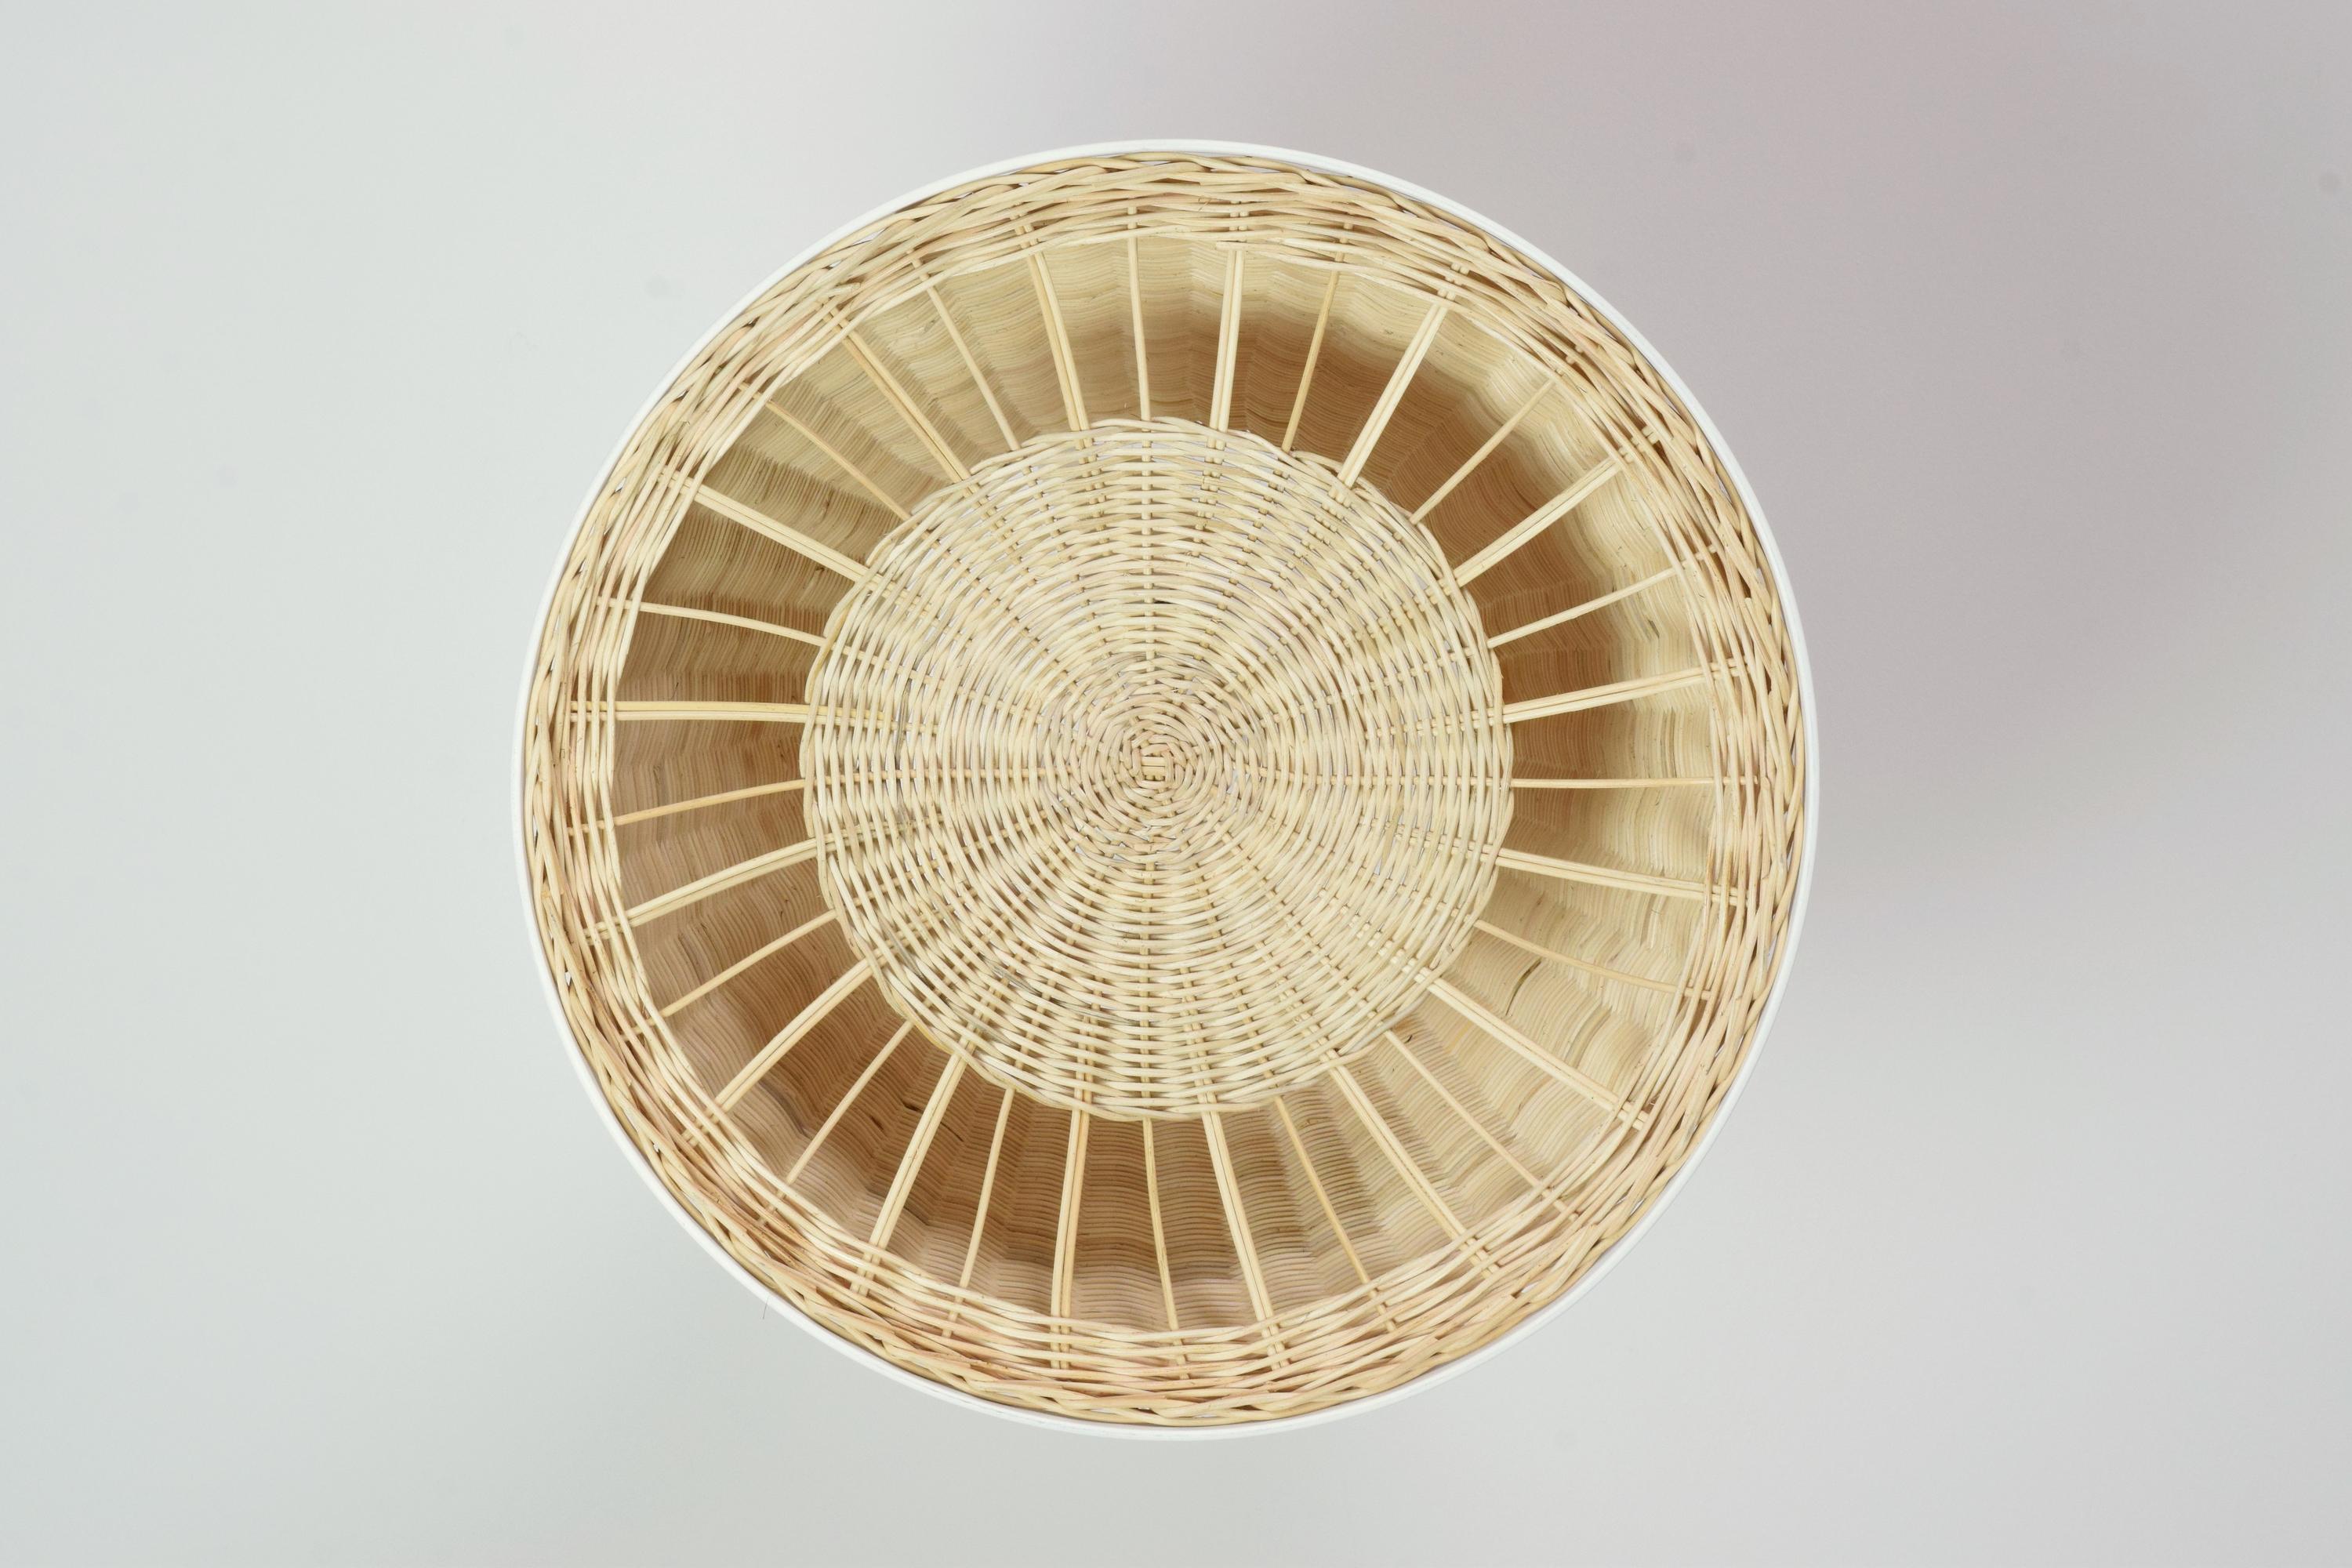 Caeli-W Monumental Steel Rattan Pendant Light, Flow Collection In New Condition For Sale In Paris, FR